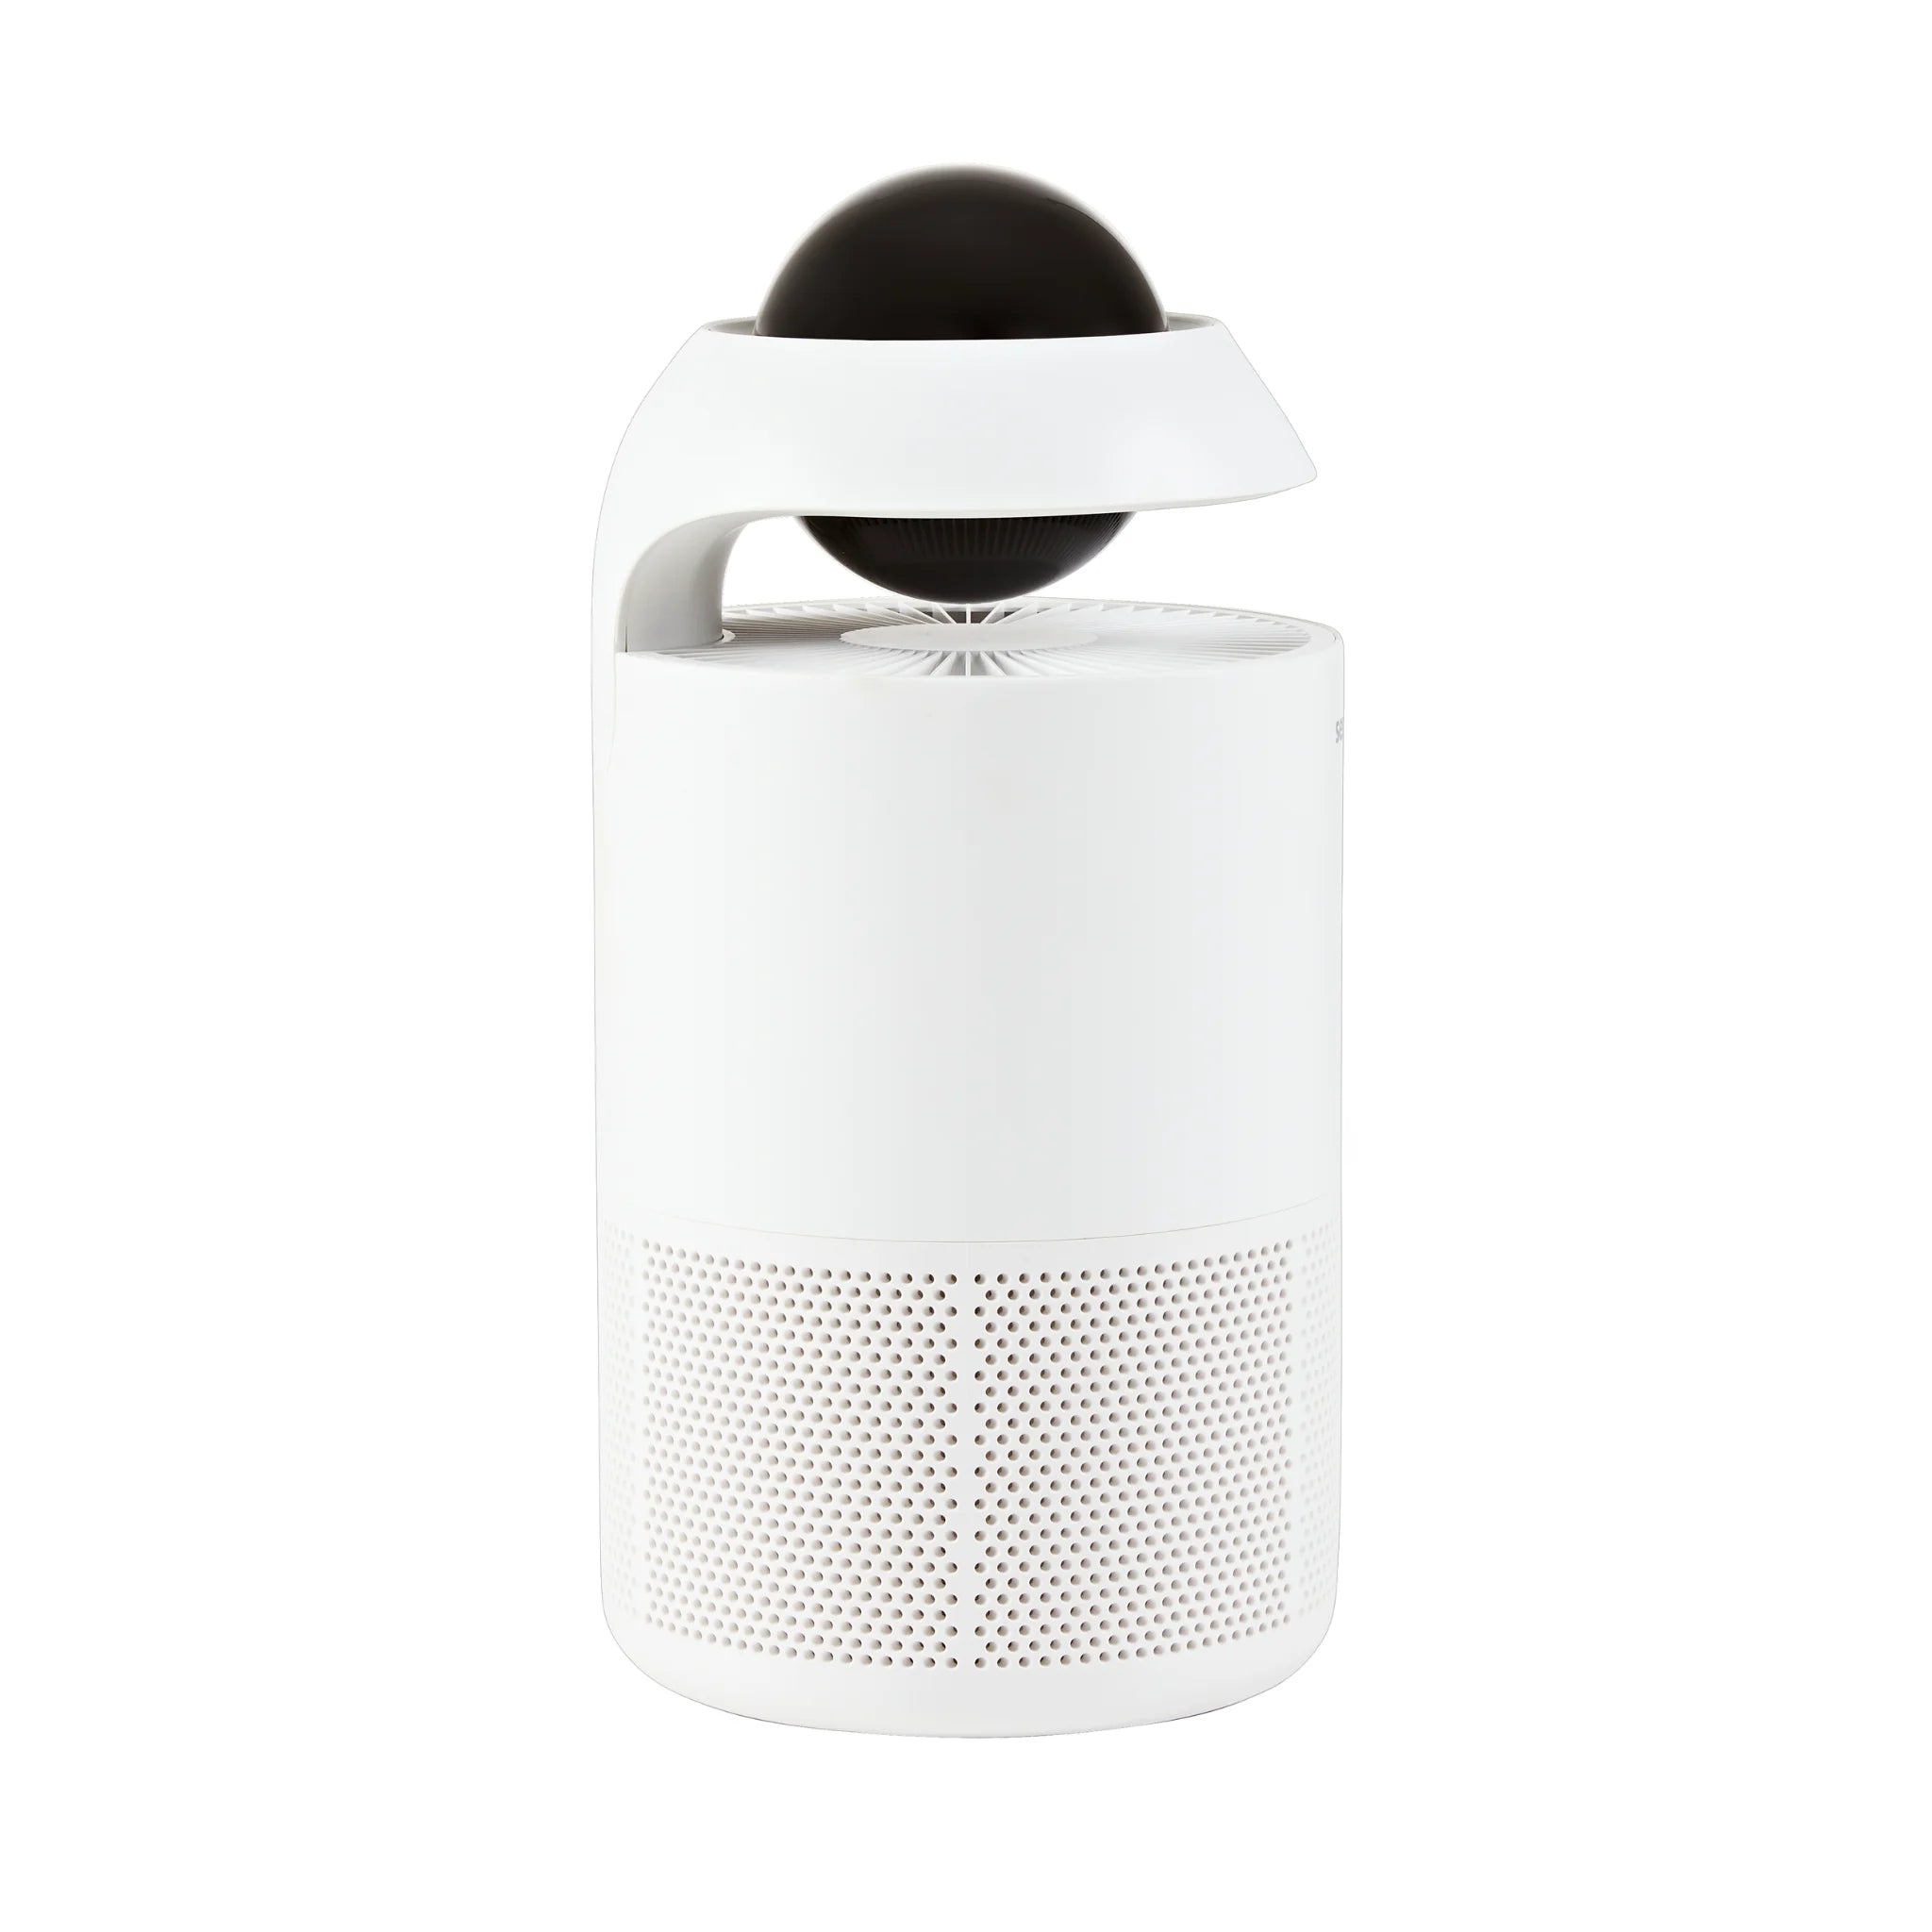 Side view of the Senelux Jupiter Air Purifier. An electronic air purifier that kills 99.99% of air pollutants.